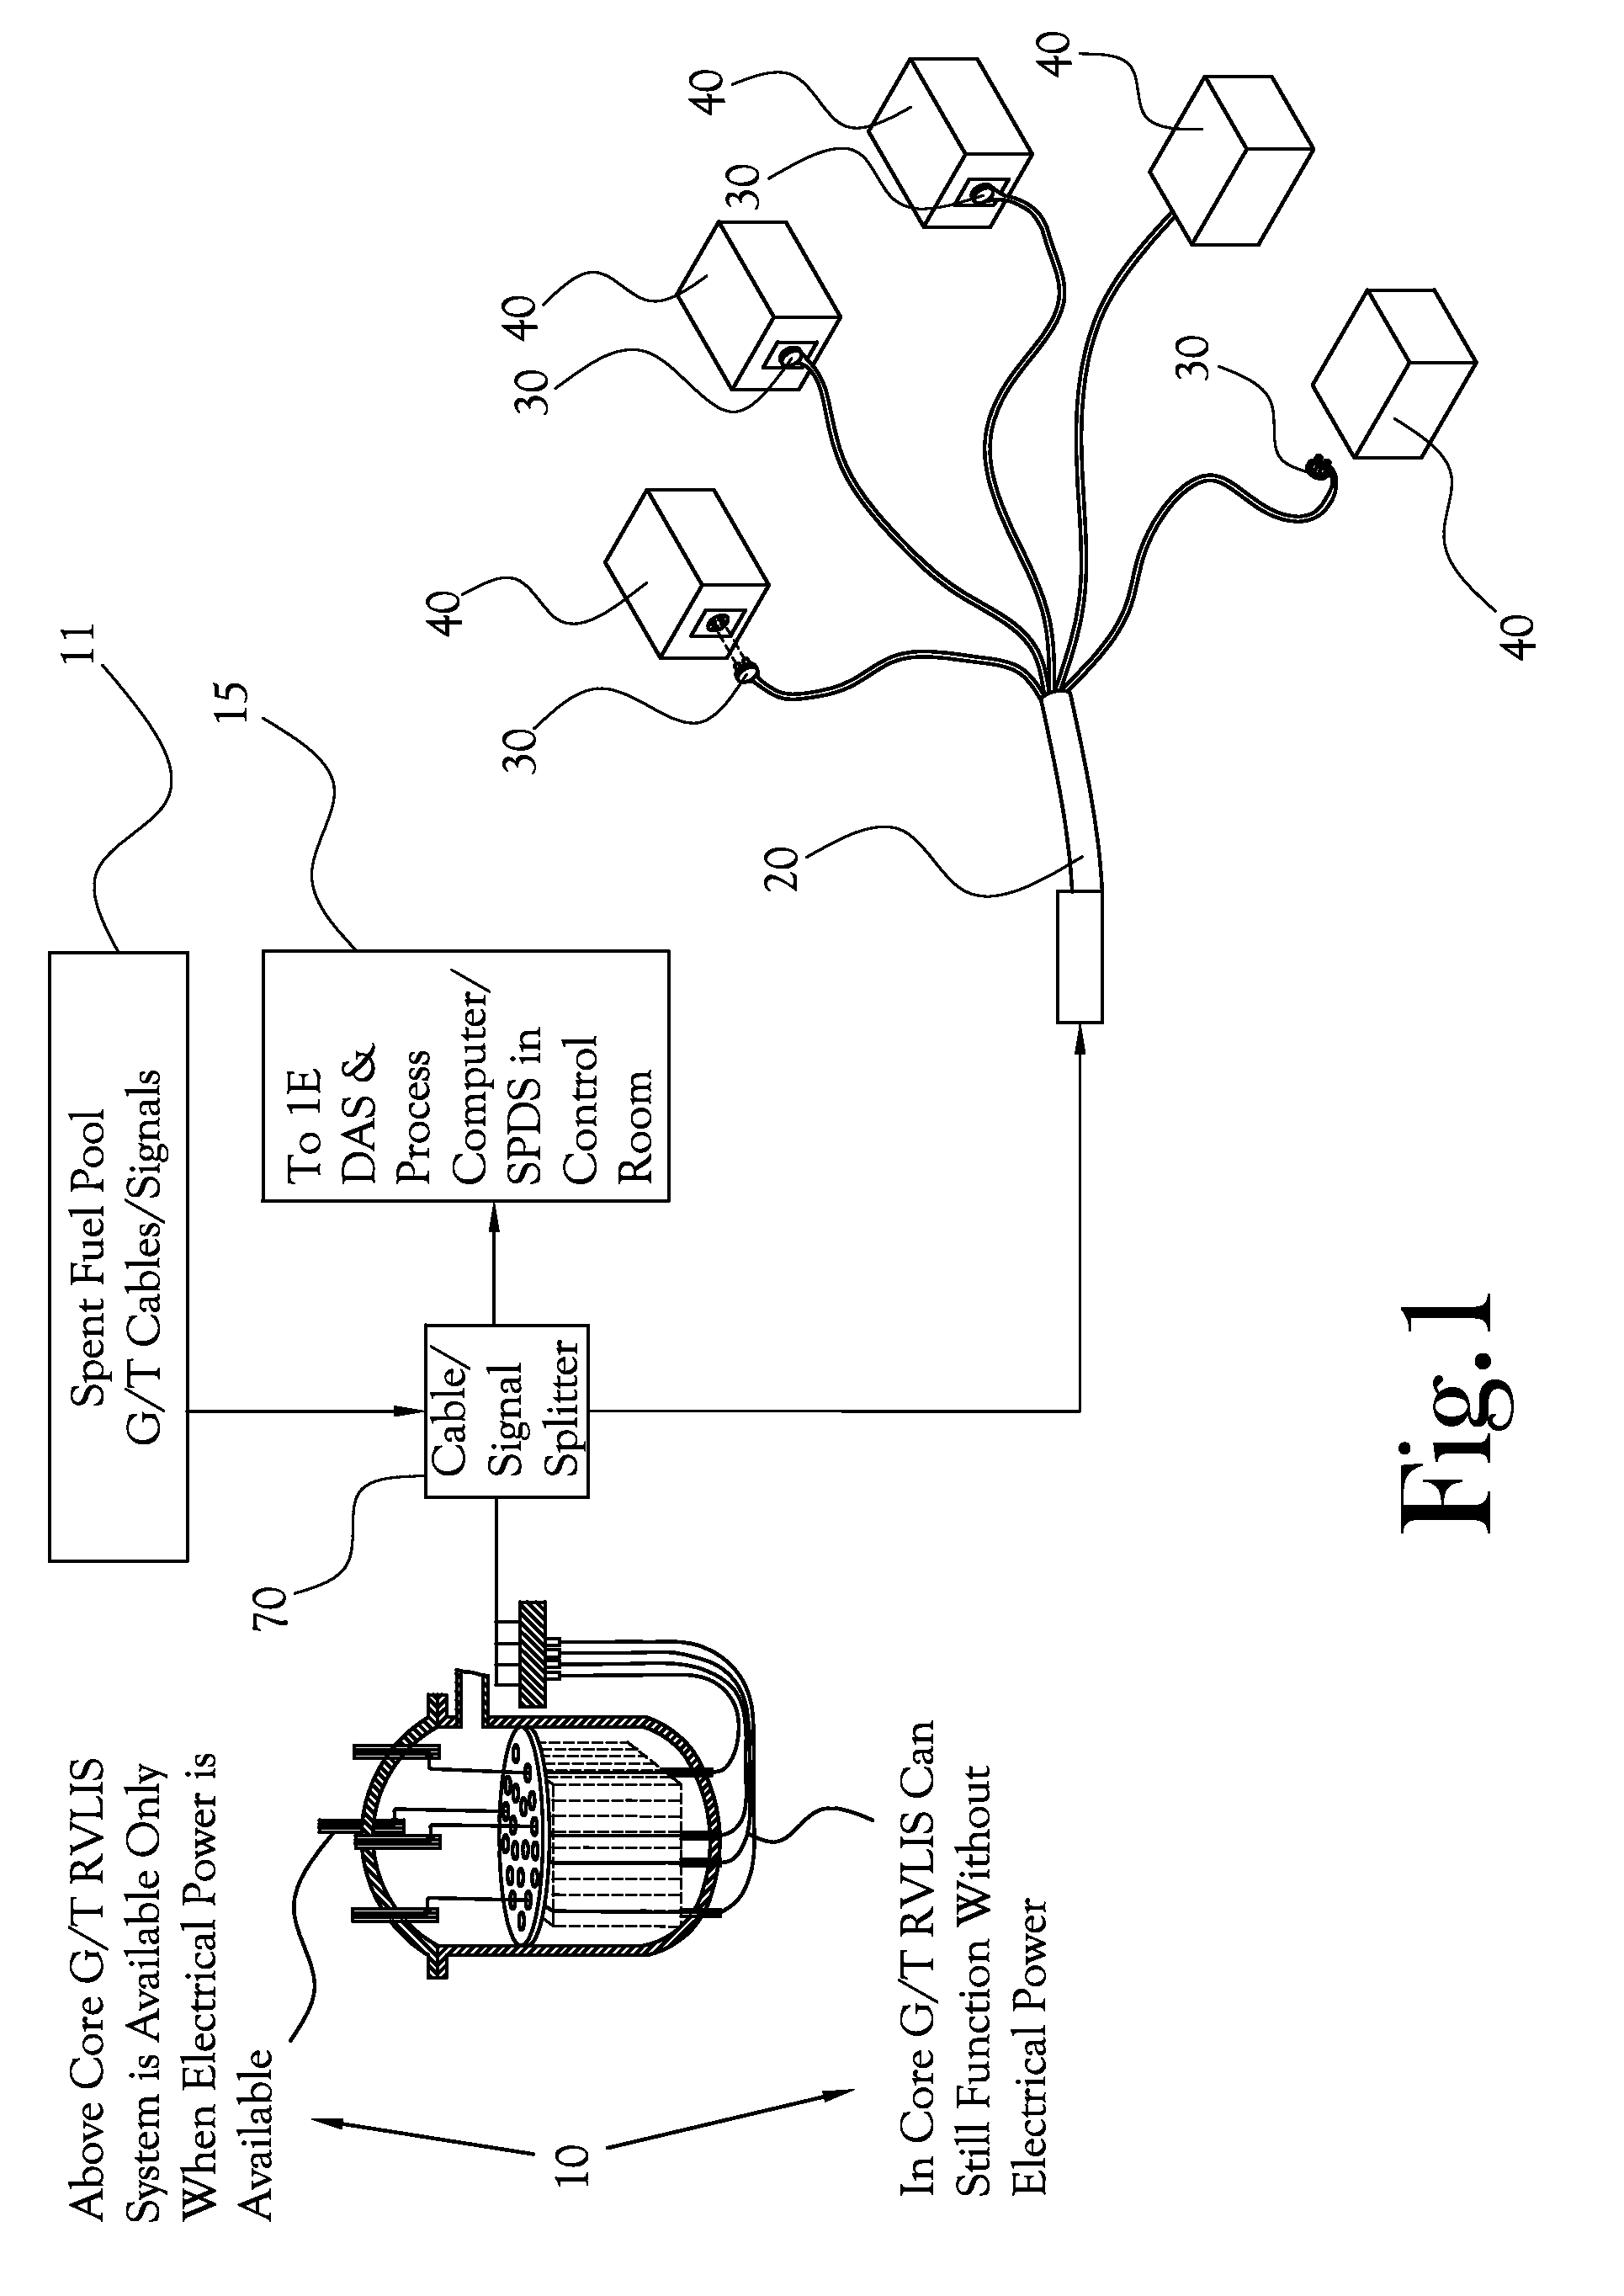 Passive Gamma Thermometer Level Indication And Inadequate Core Monitoring System And Methods For Power Reactor Applications During A Station Electrical Blackout (SBO) Or Prolonged Station Blackout (PSBO) Event